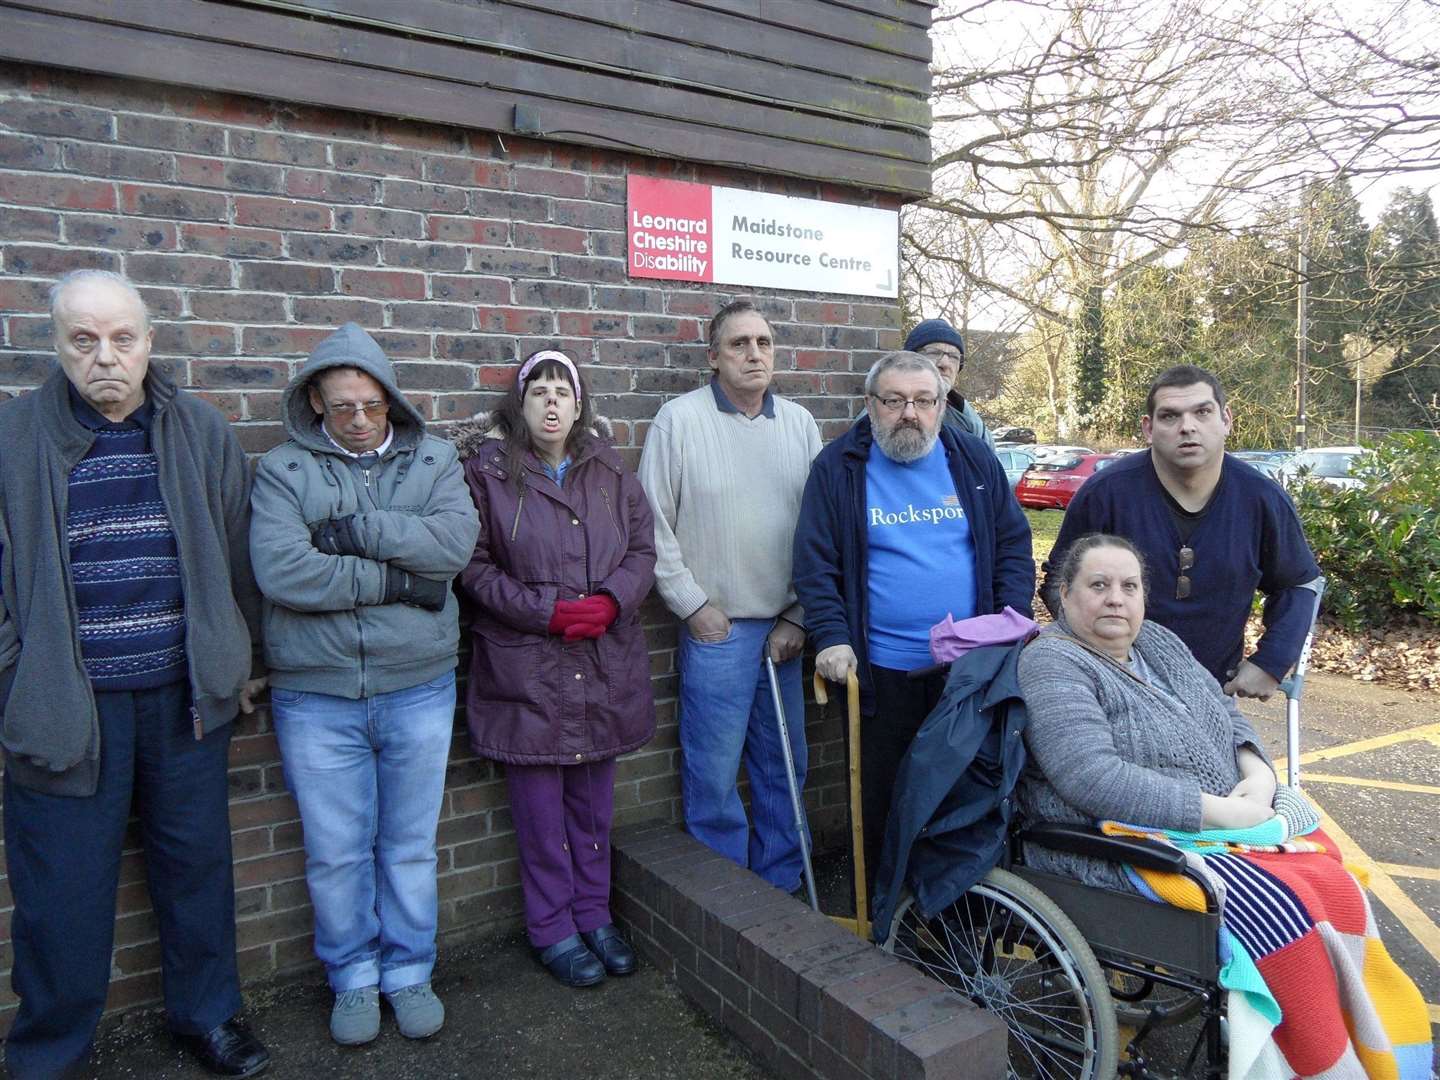 In 2015 the Maidstone Resource Centre was threatened with closure in Aylesford